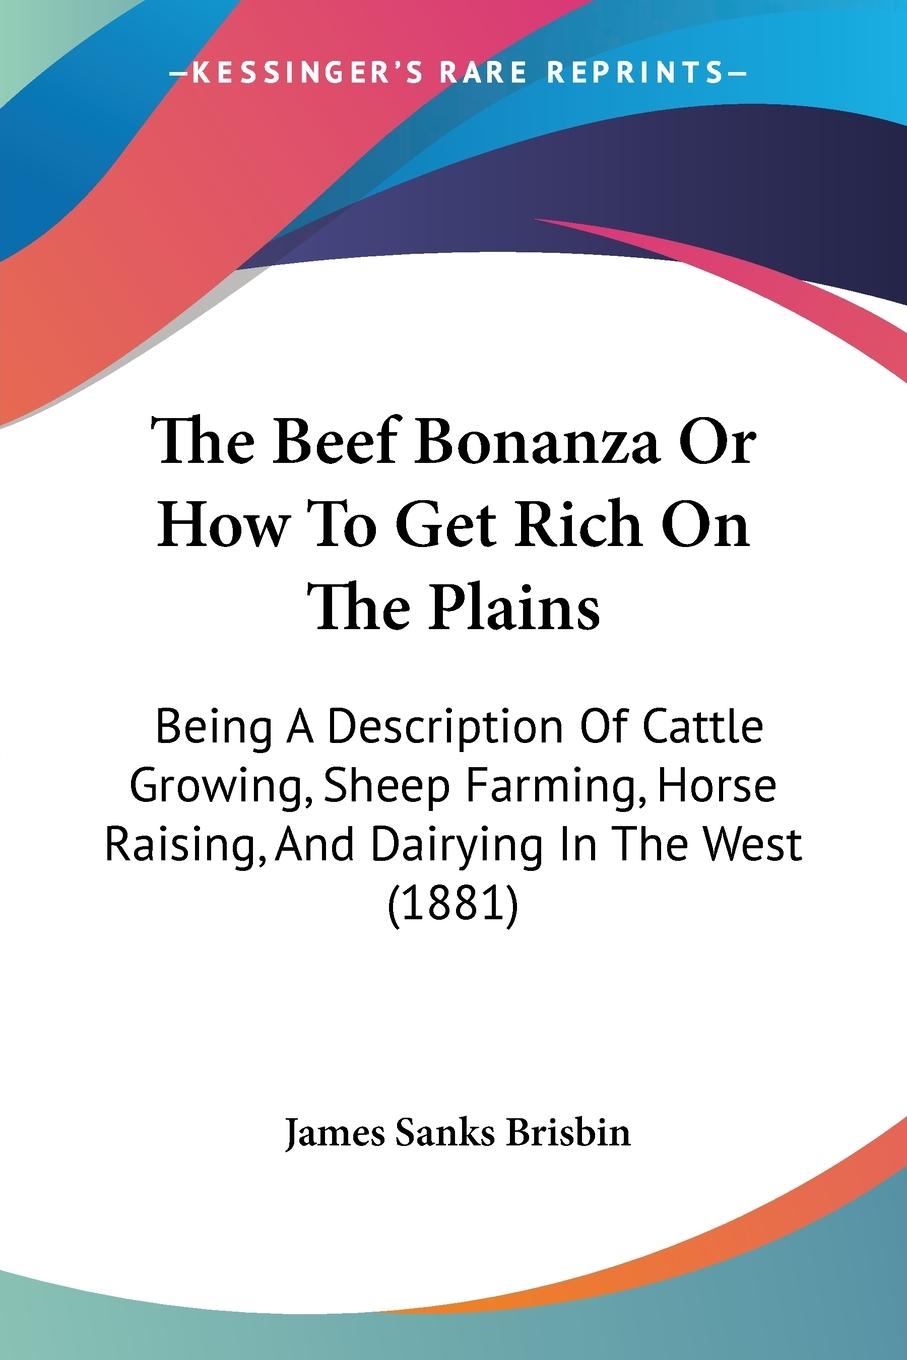 The Beef Bonanza Or How To Get Rich On The Plains - Brisbin, James Sanks